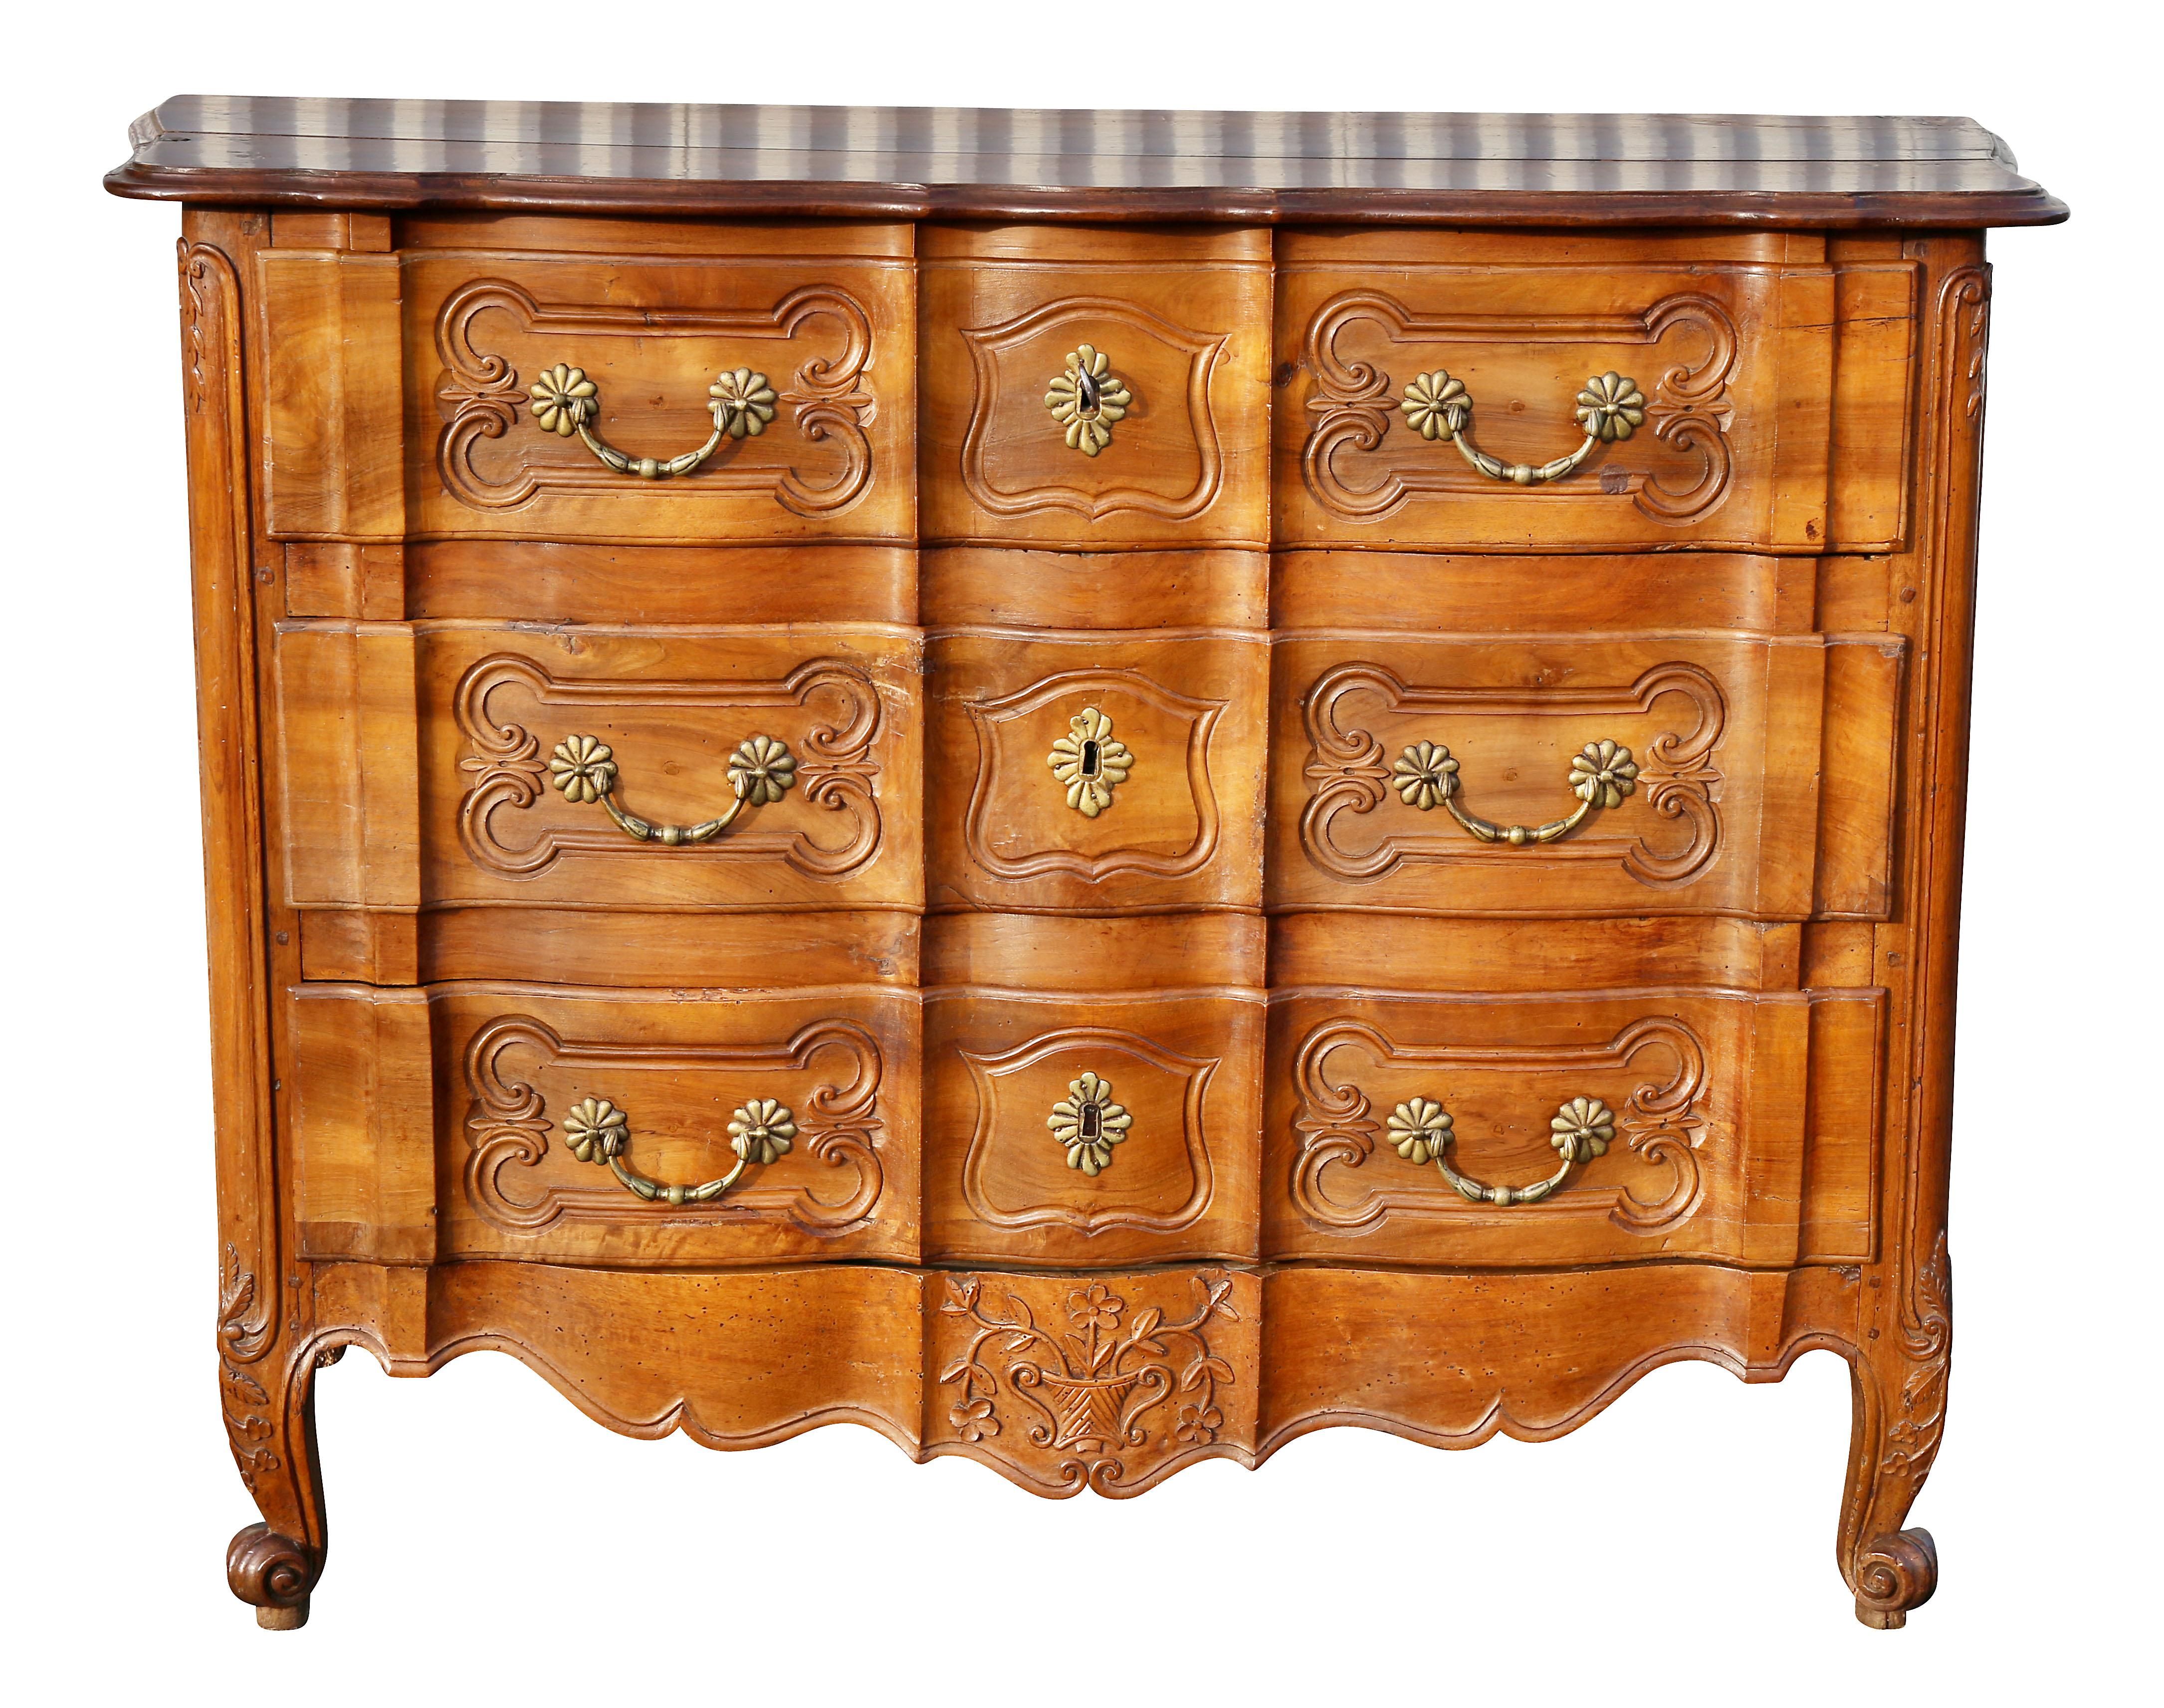 With serpentine rectangular top over three conforming drawers and a carved shaped apron raised on cabriole legs and scroll feet. Paneled sides.
Provenance: Fogg Estate, Chestnut Hill Mass.